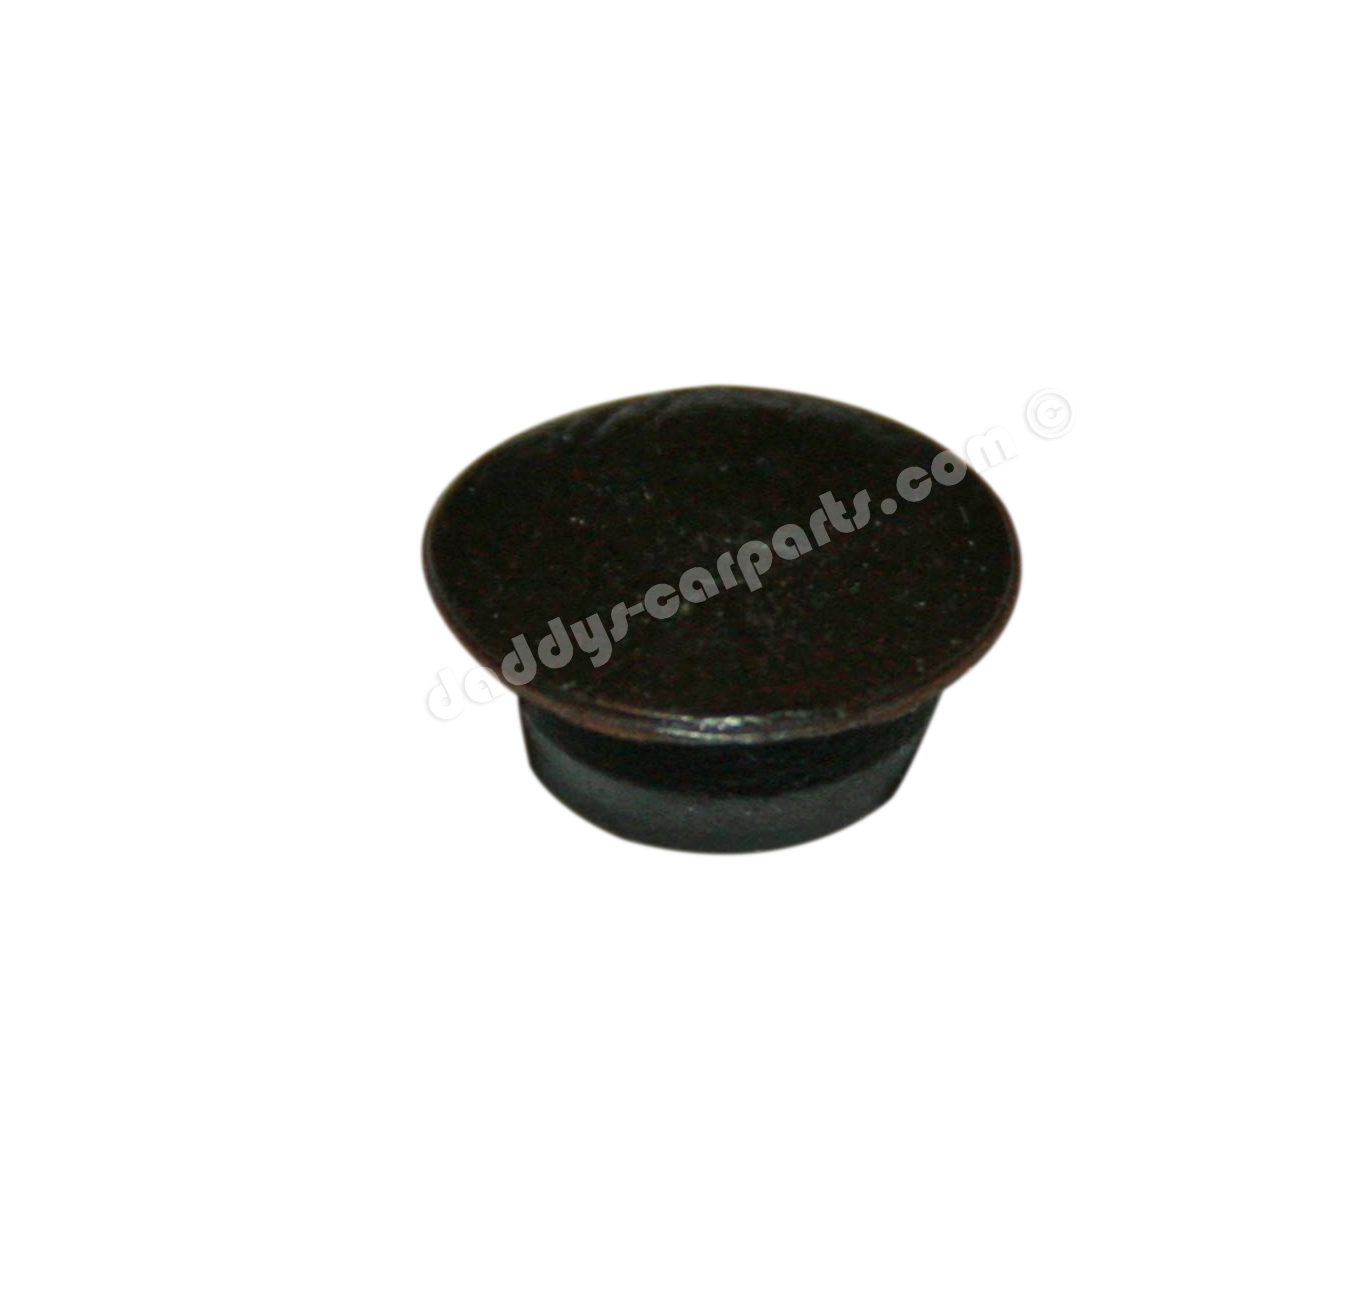 INTERIOR LINING CAP UPHOLSTERY BROWN FOR PORSCHE 924 944